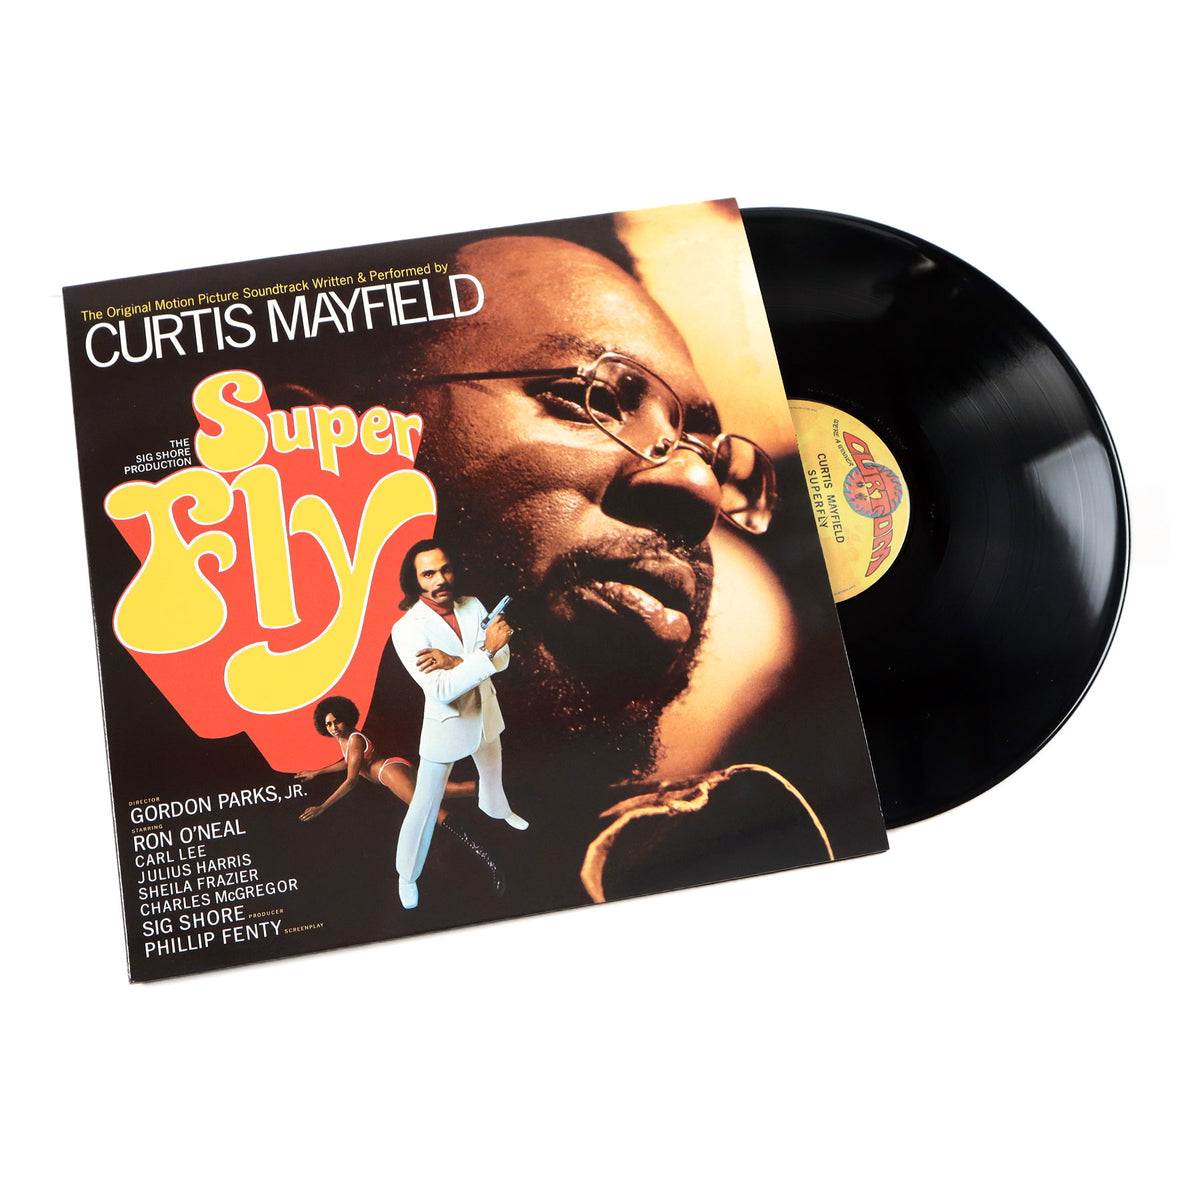 Curtis Mayfield: Superfly - 50th Anniversary Edition (Run Out Groove) Vinyl  2LP